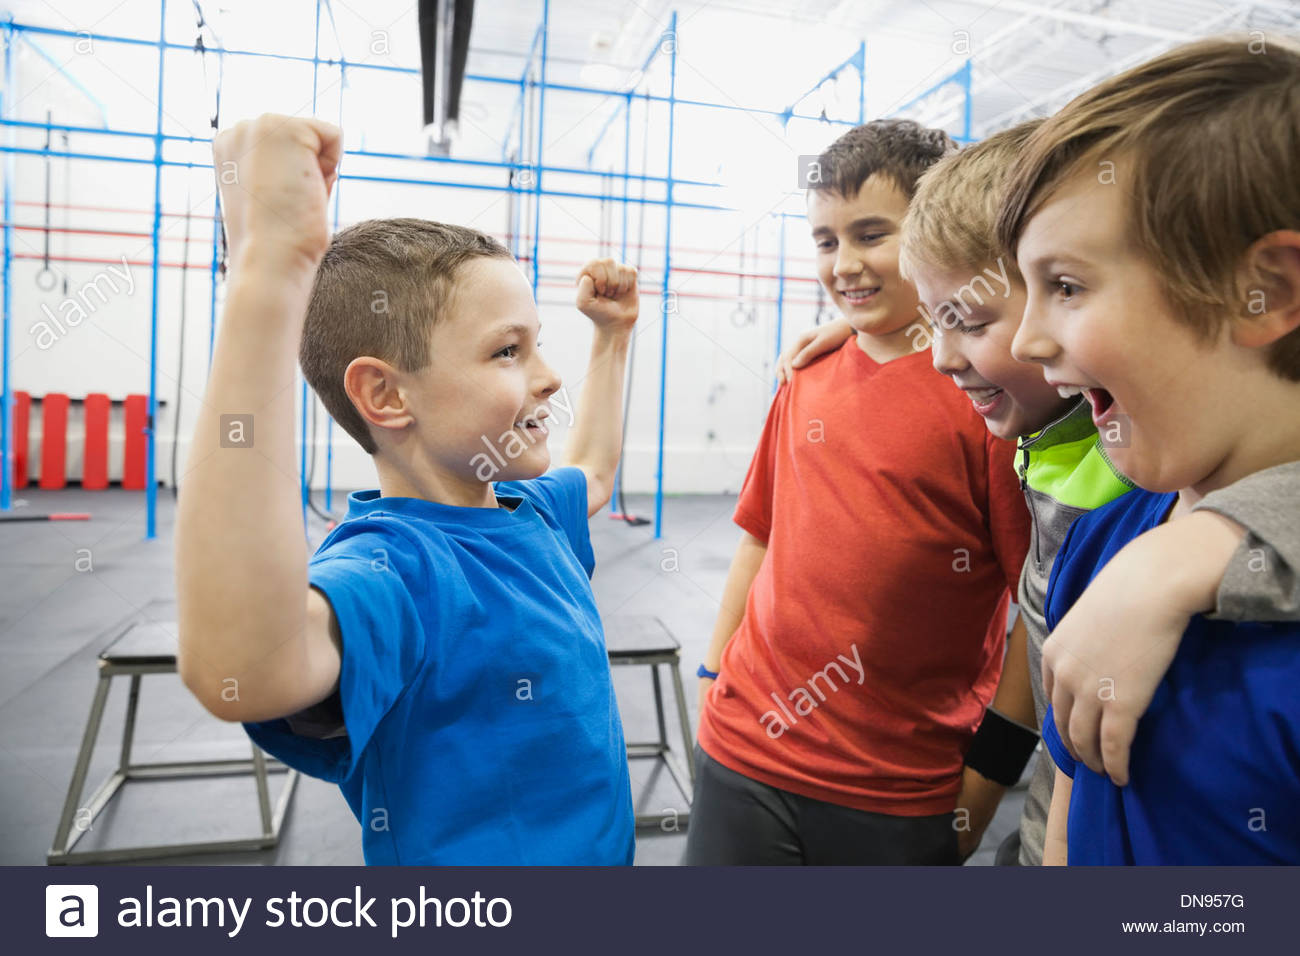 Boy showing muscles to friends in gym Stock Photo